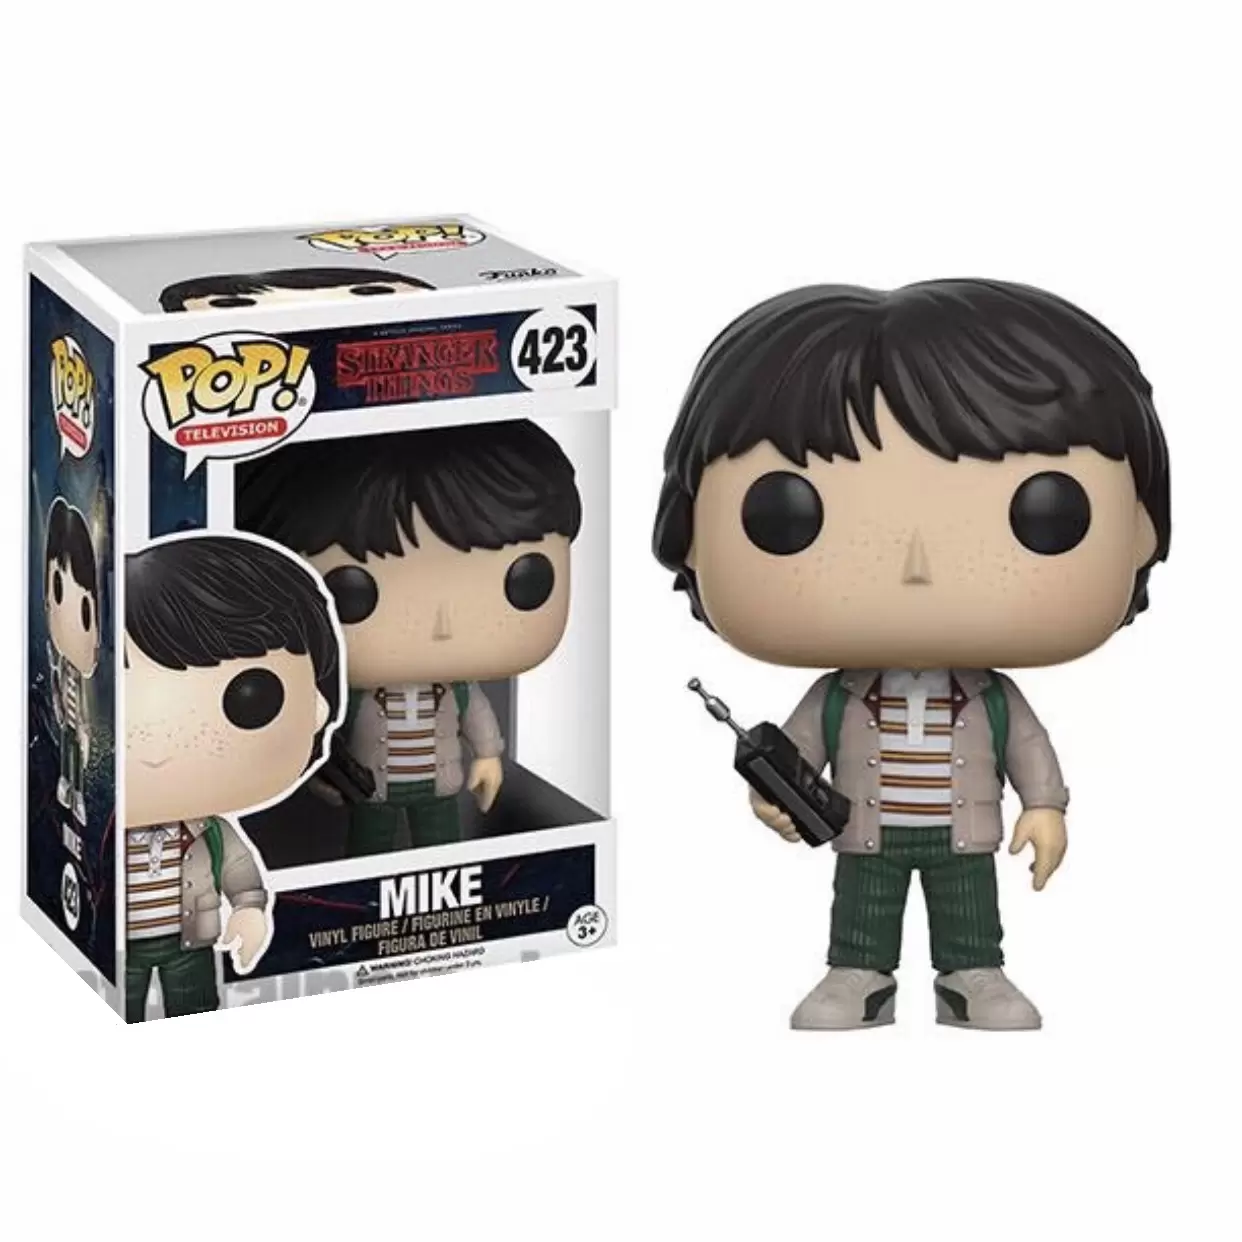 POP! Television - Stranger Things - Mike